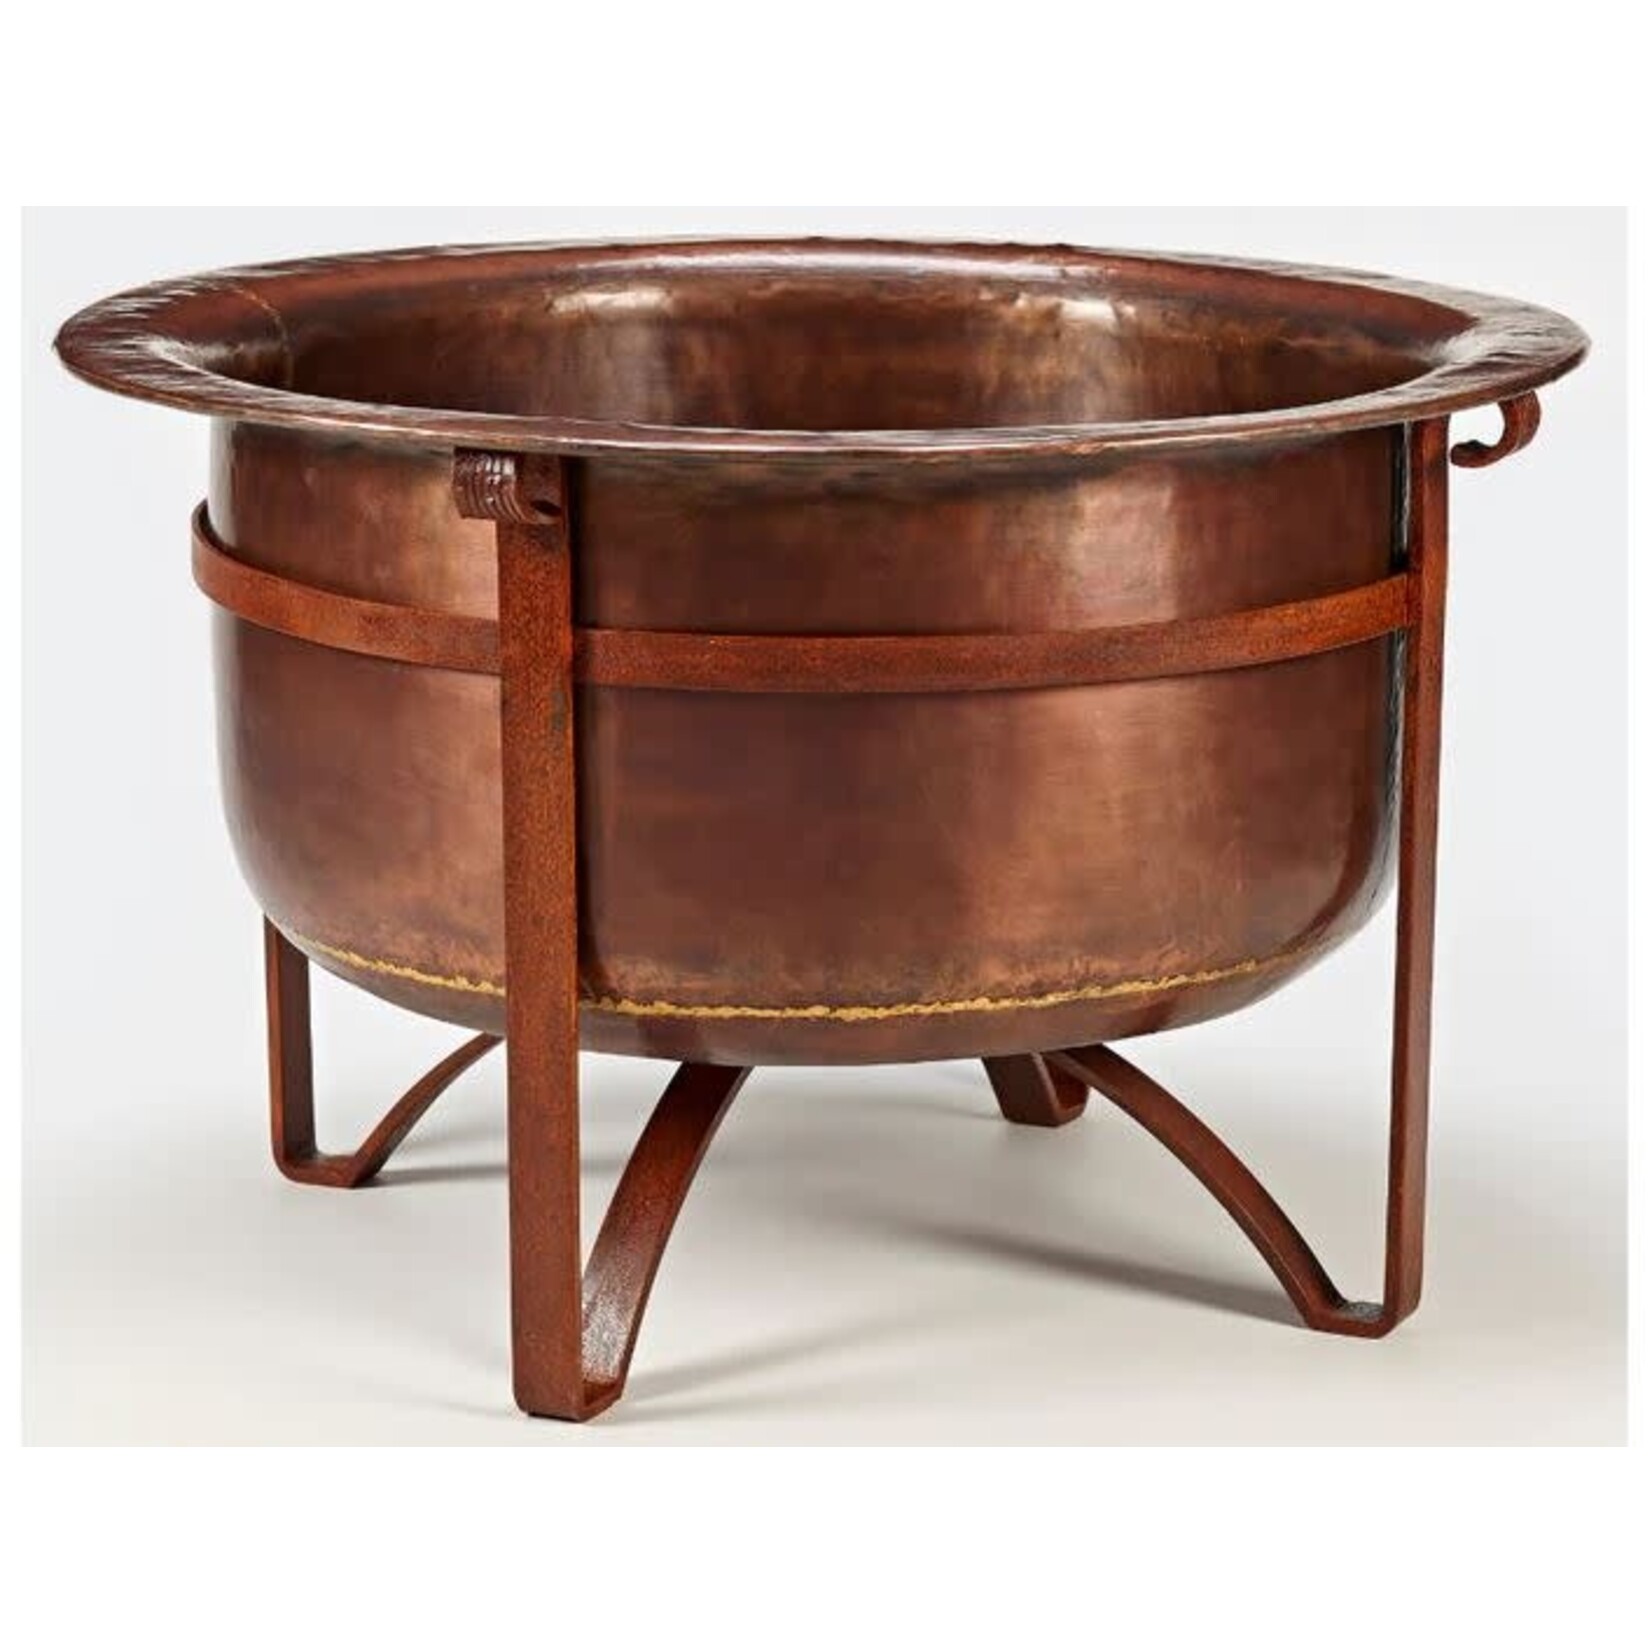 Flaming Gorge Rustic Acadia Copper Fire Pit 36"